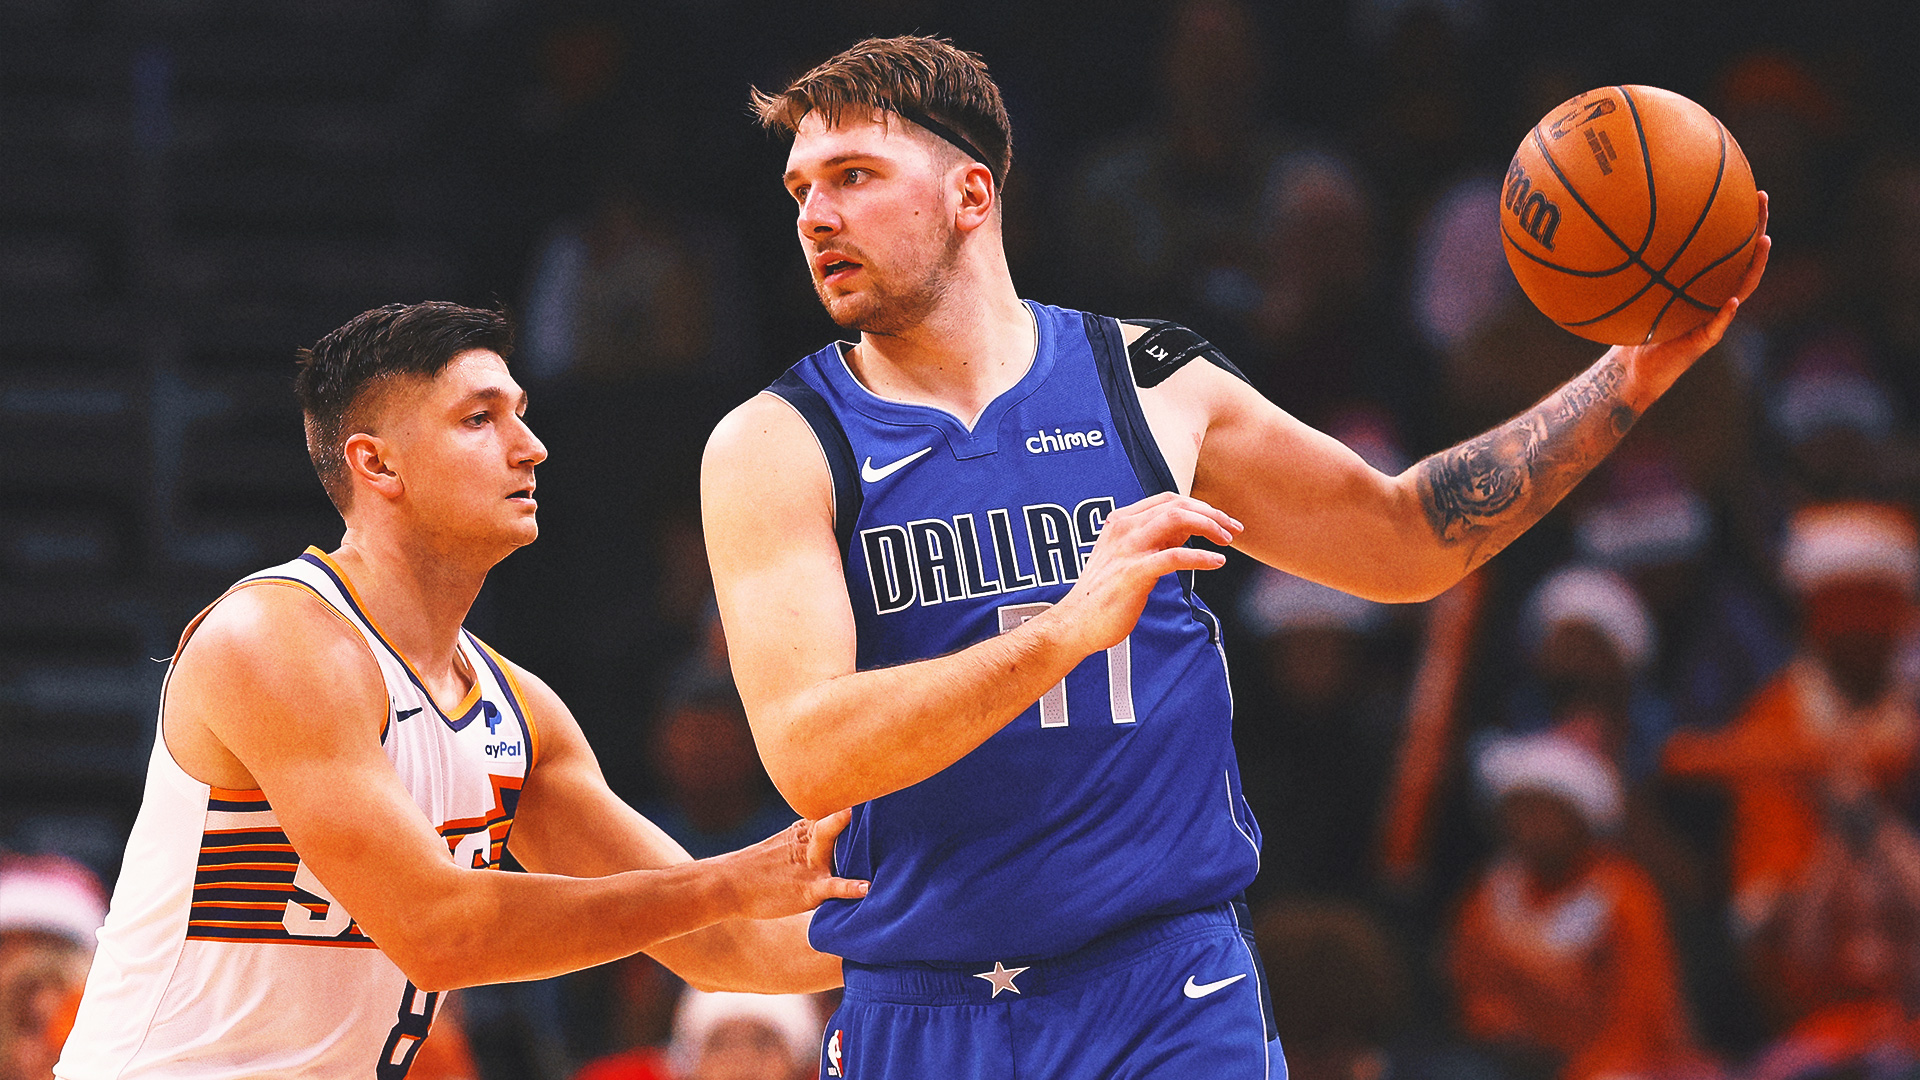 Luka Doncic scores 50 points to eclipse 10,000 for career, Mavericks beat Suns 128-114